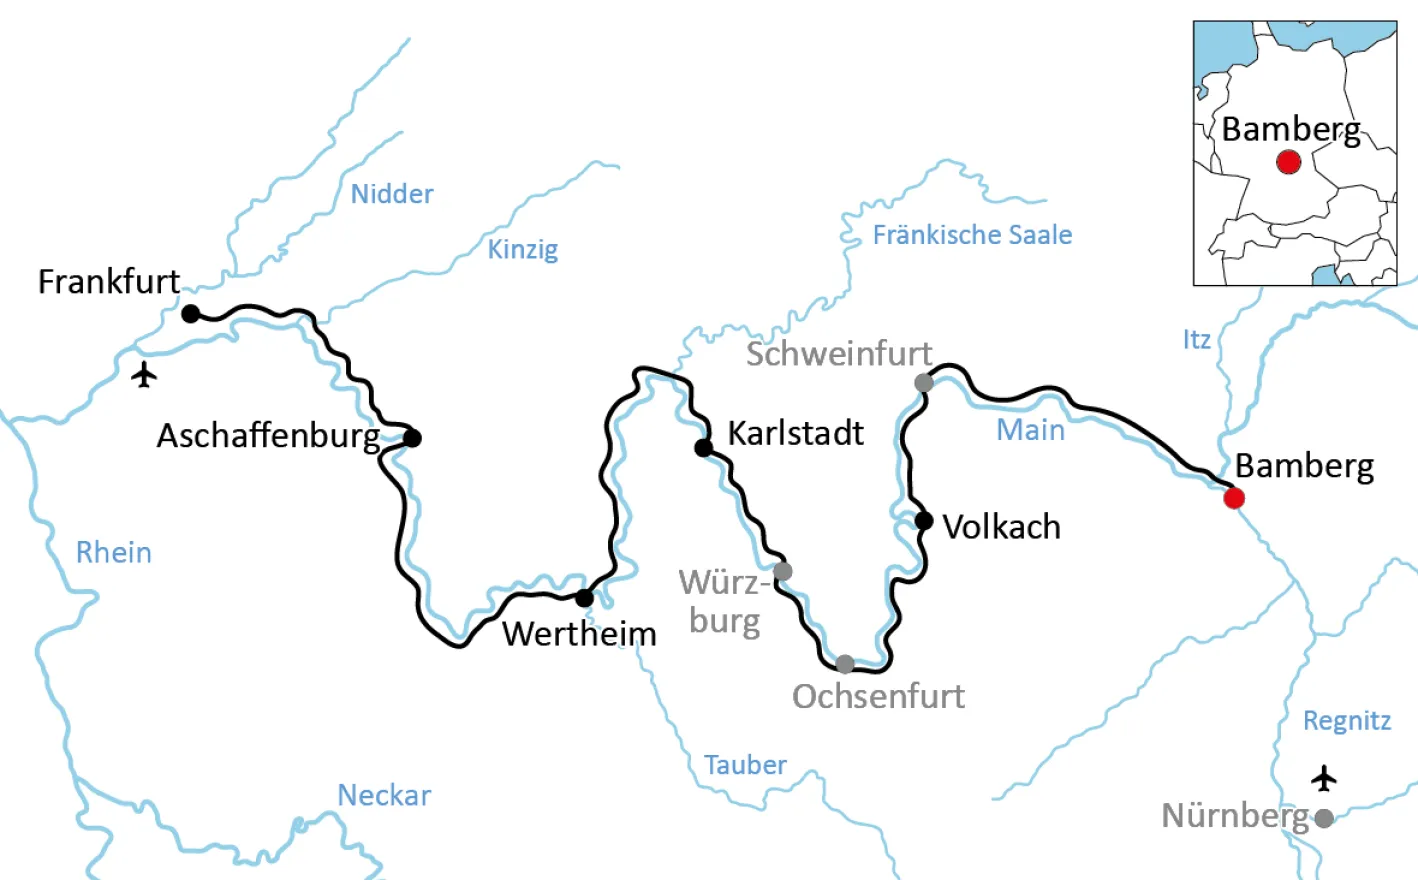 Map for the bike tour from Bamberg to Frankfurt